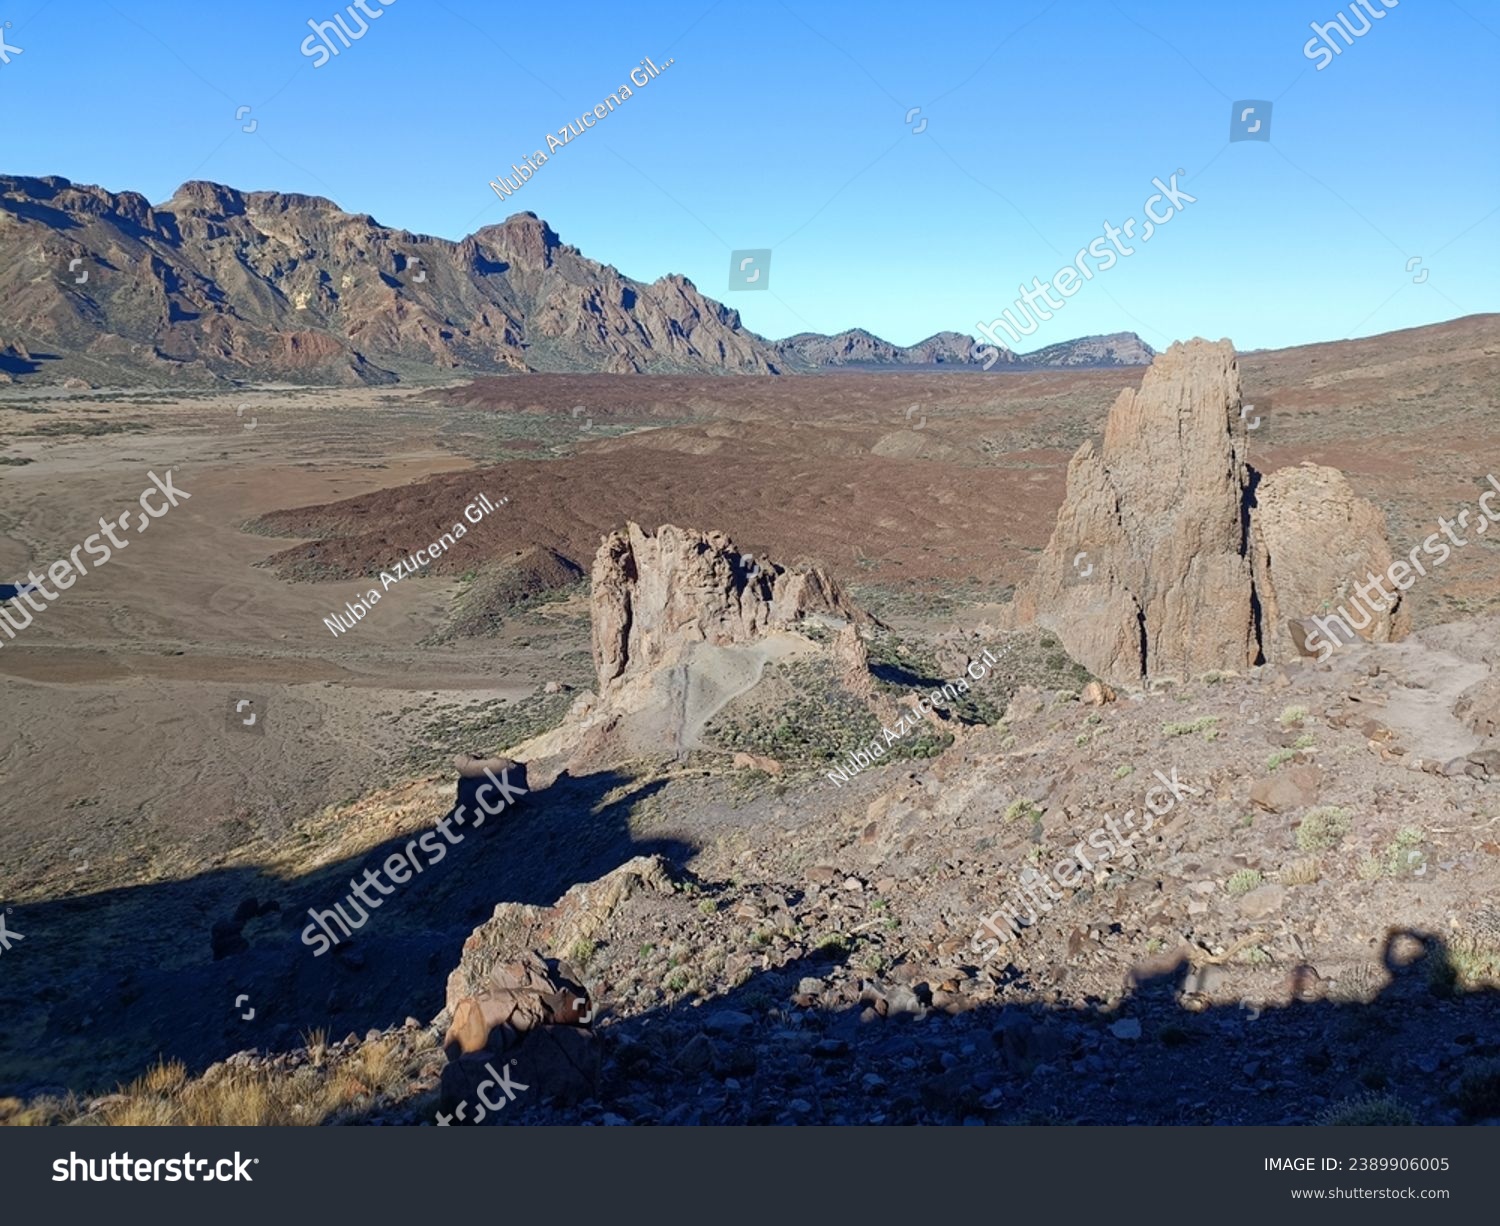 Surroundings of Teide. Volcano located on the Spanish island of Tenerife, you can see the inhospitable terrain, blue sky, large rocks of volcanic origin and typical vegetation. #2389906005